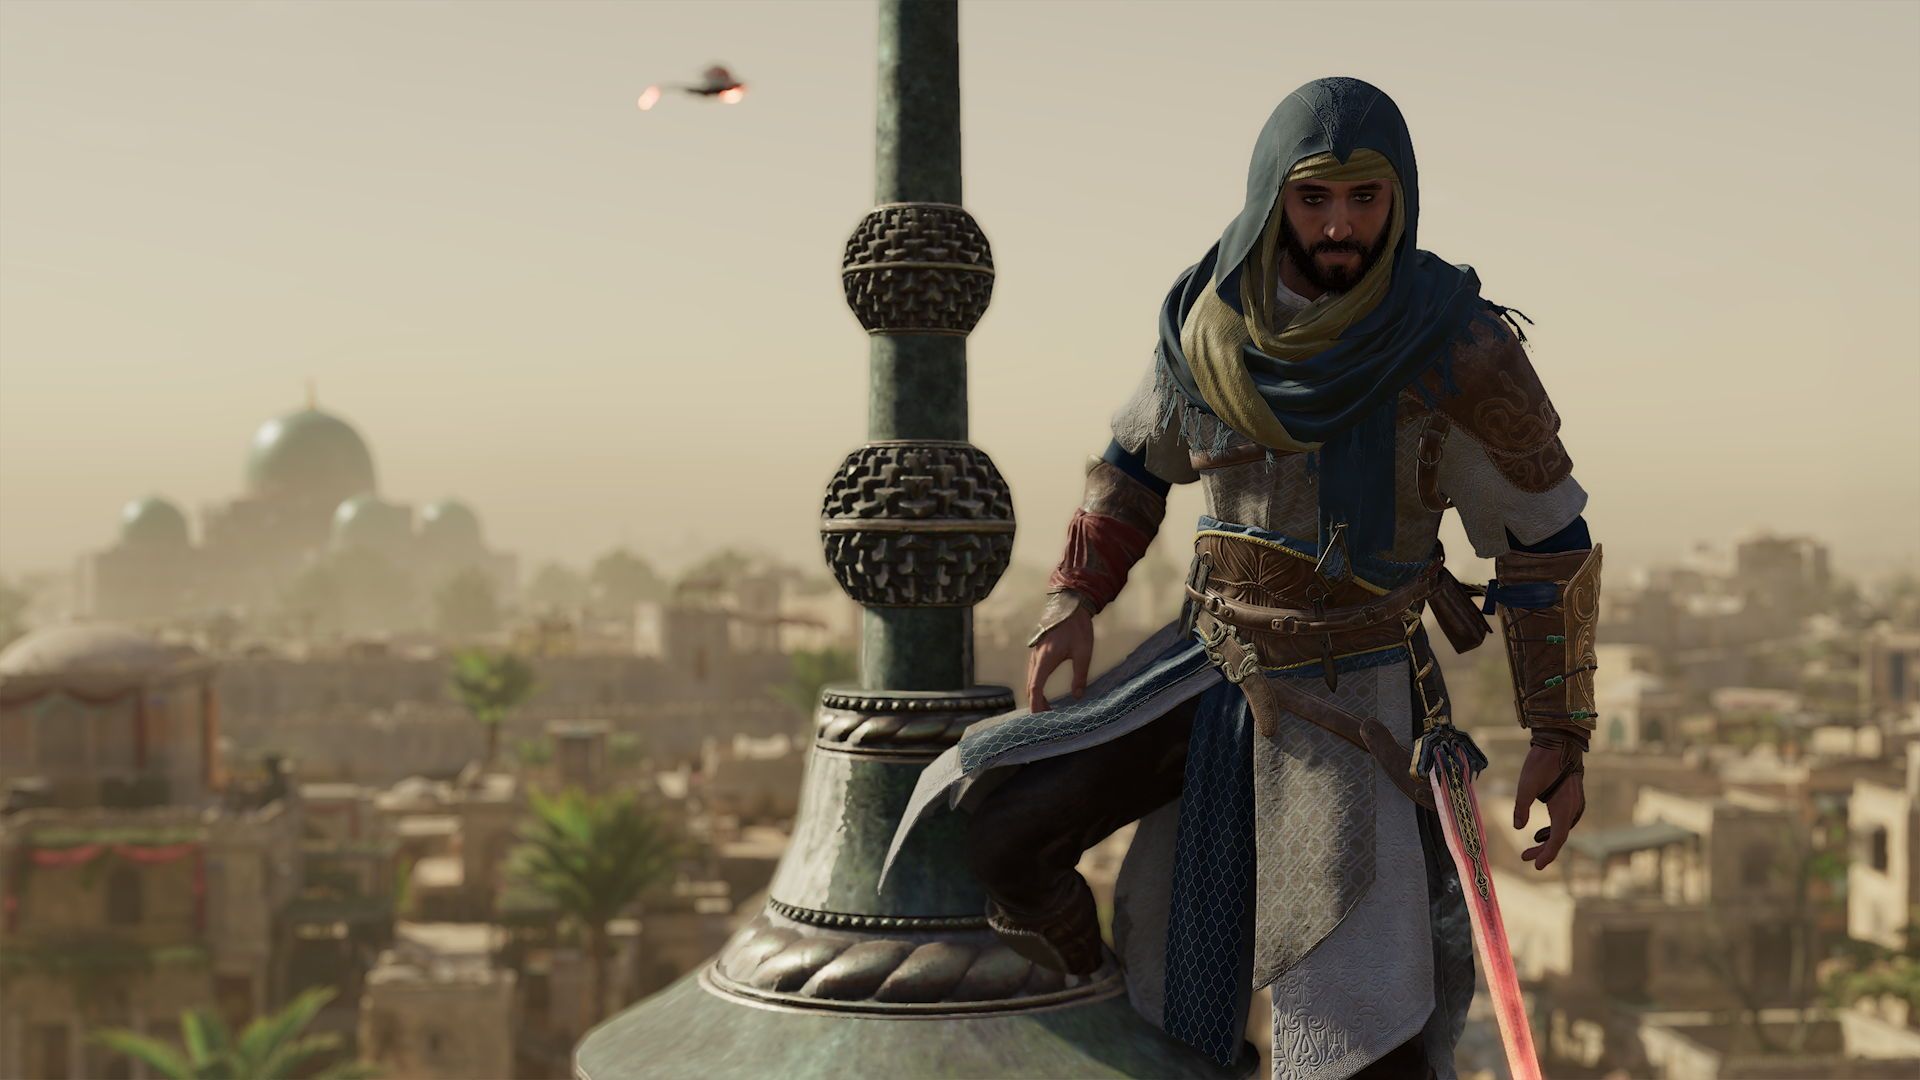 There is something about Assassins Creed